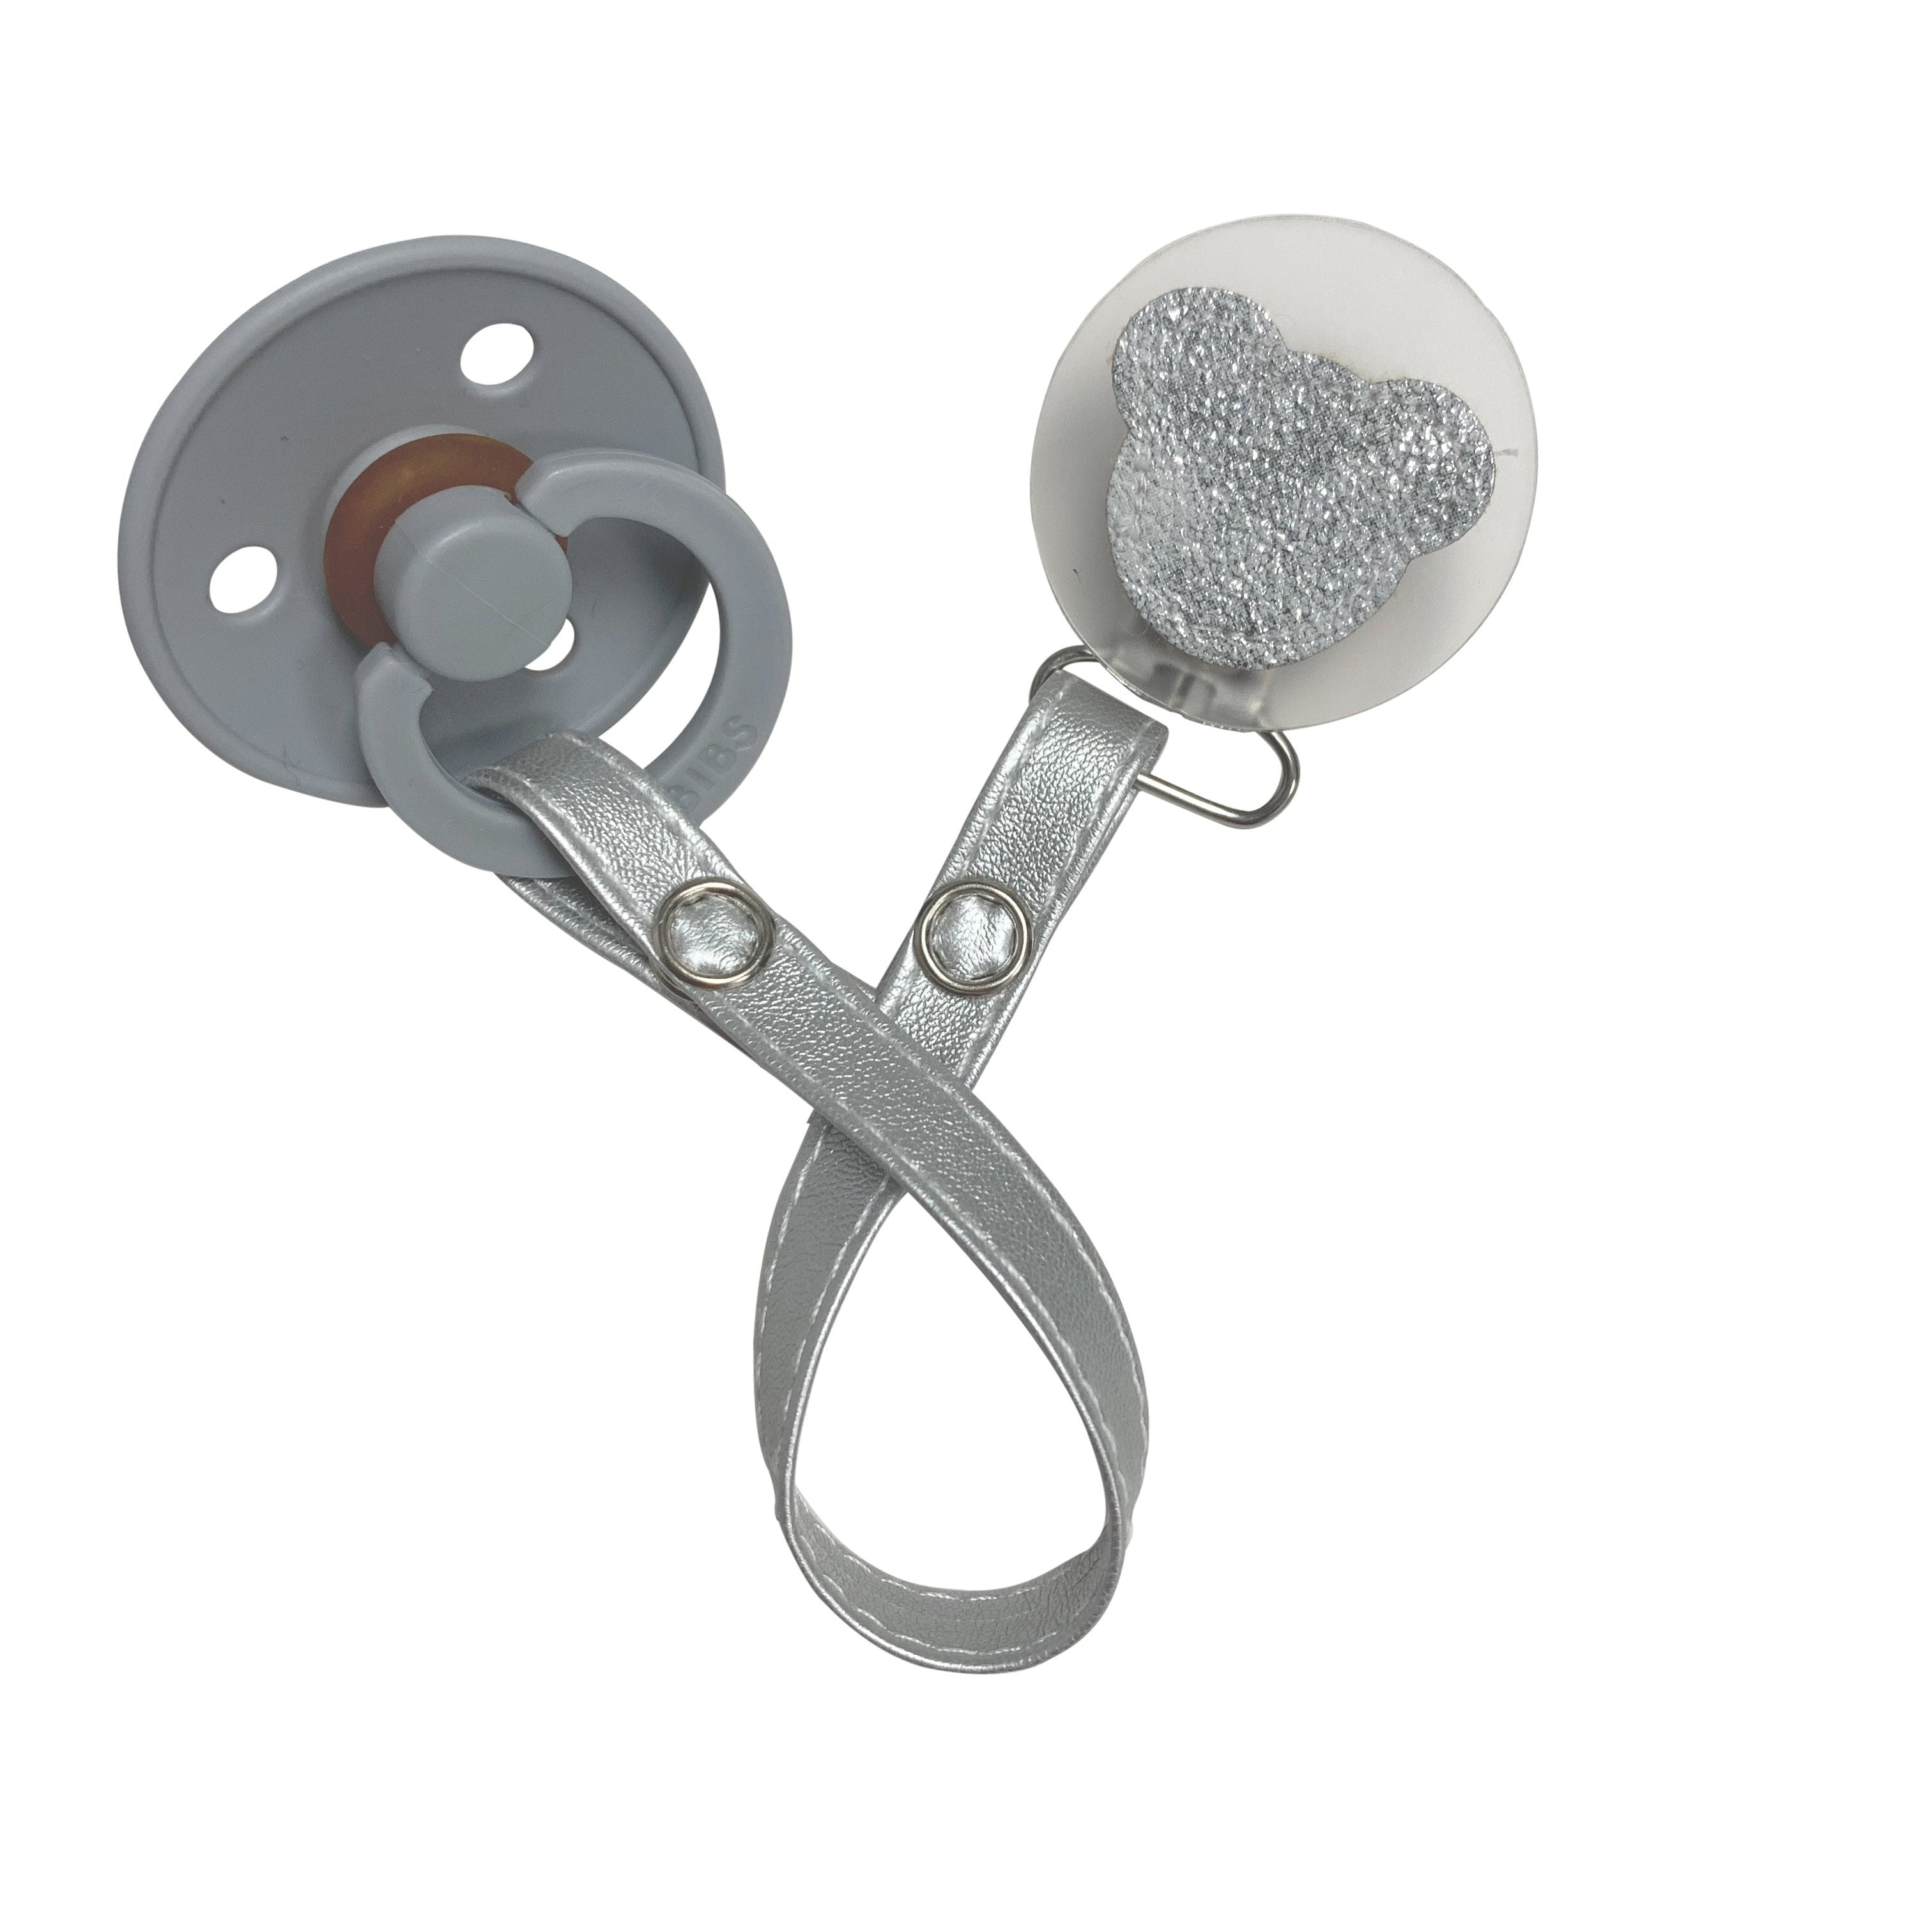 Classy Paci sparkle WHITE leather Teddy, Silver, Grey, girl boy baby pacifier clip GIFT SET